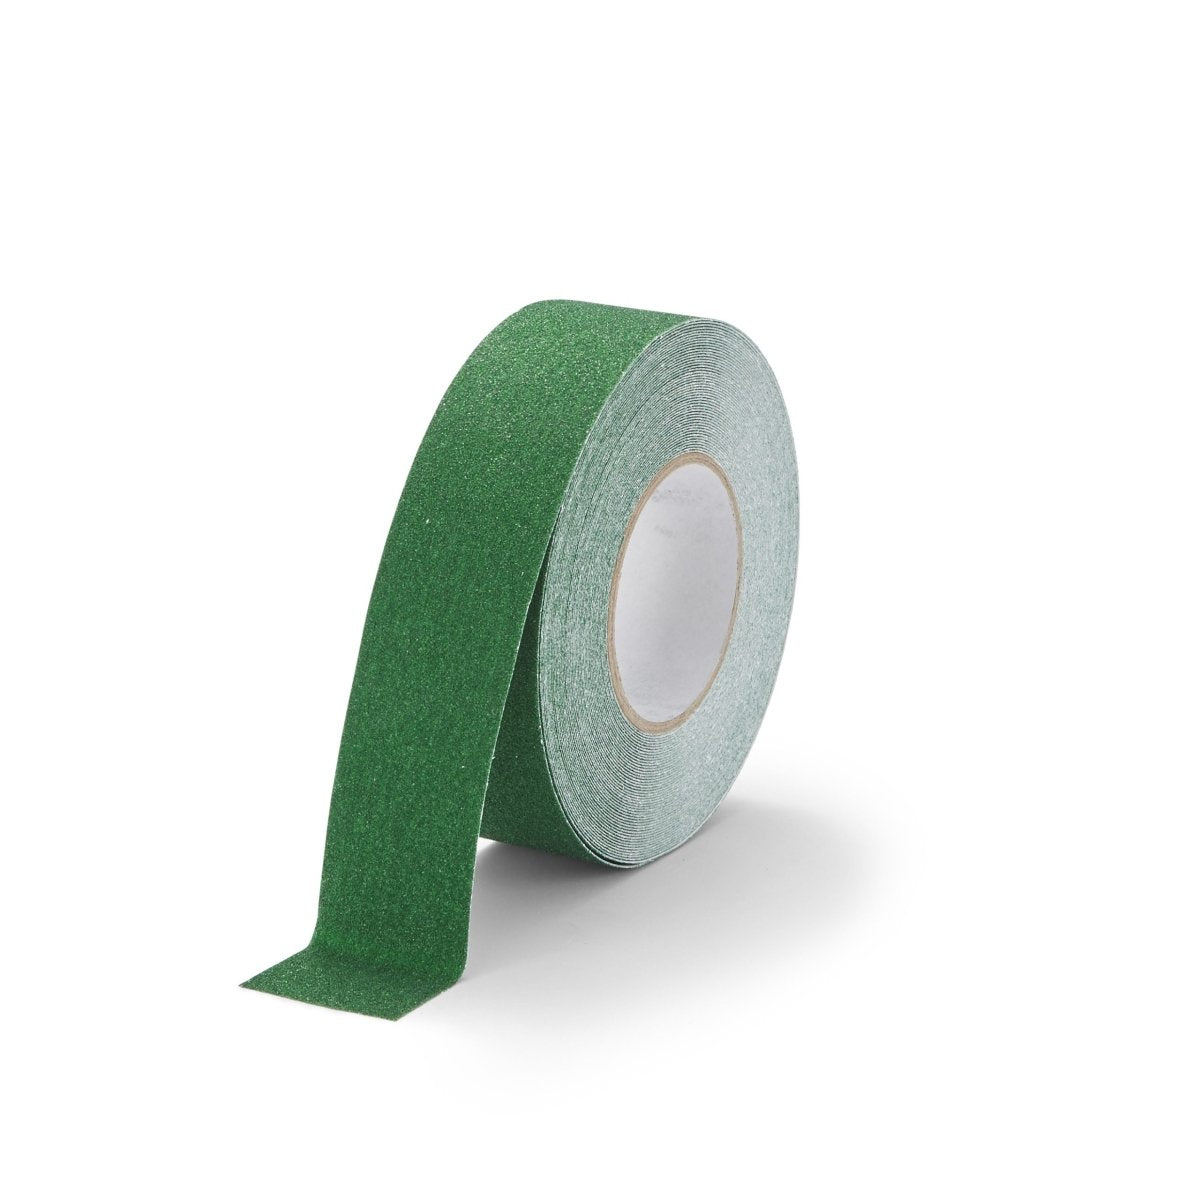 Extra Course Grade Anti Slip Tape Rolls 18m - Slips Away - H3402VUC Safety-Grip EXTRA Coarse - Green-50mm-1-2 -